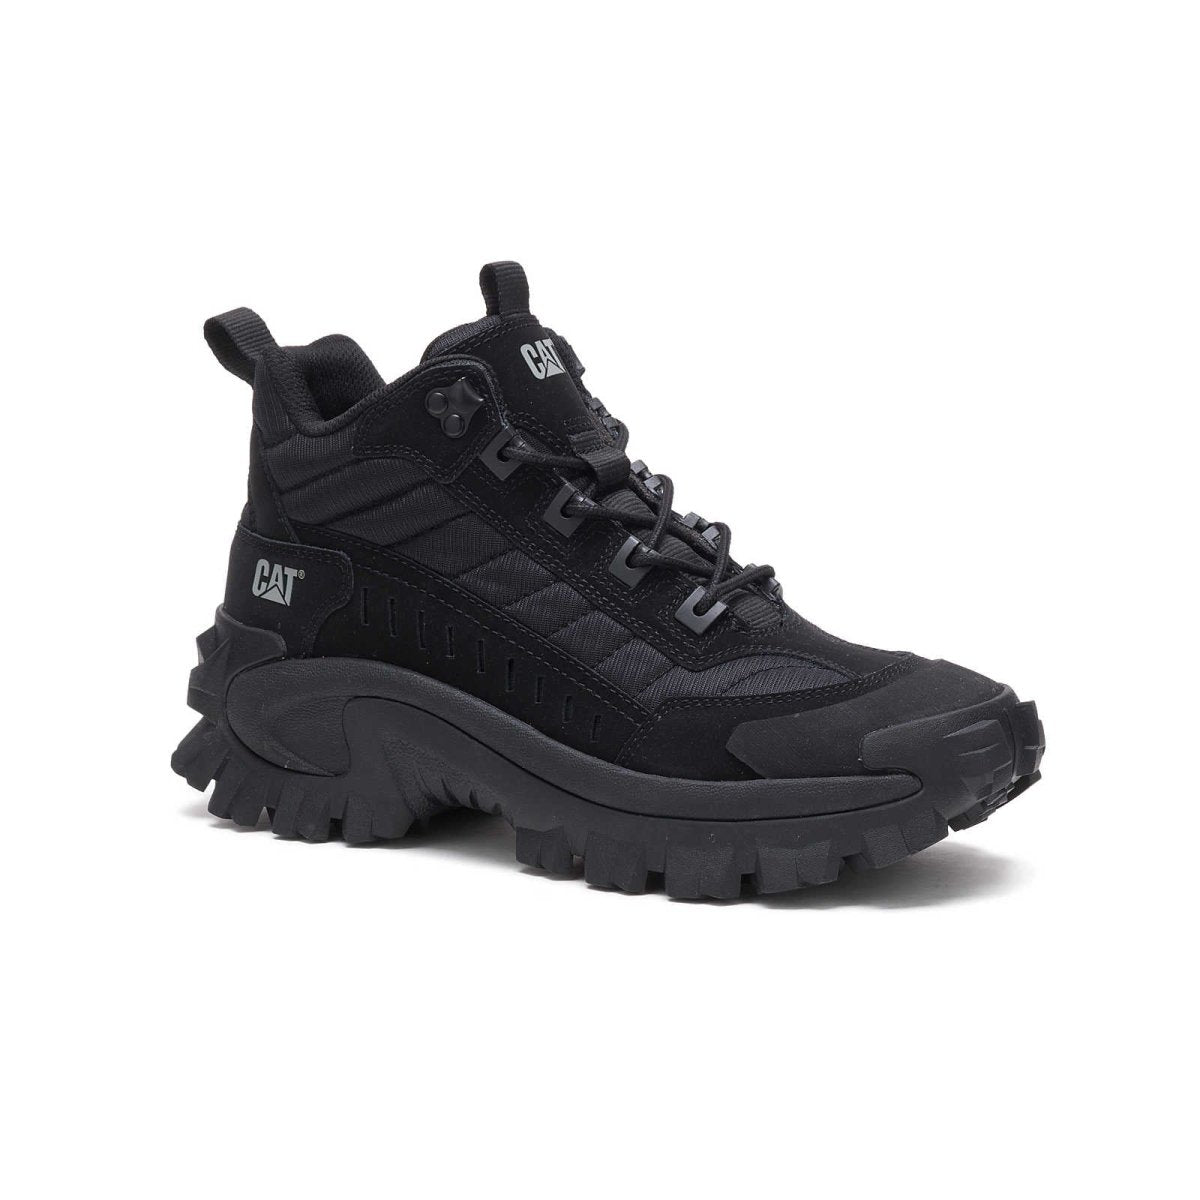 CATERPILLAR INTRUDER MID UNISEX SHOE (P110457) IN BLACK - TLW Shoes